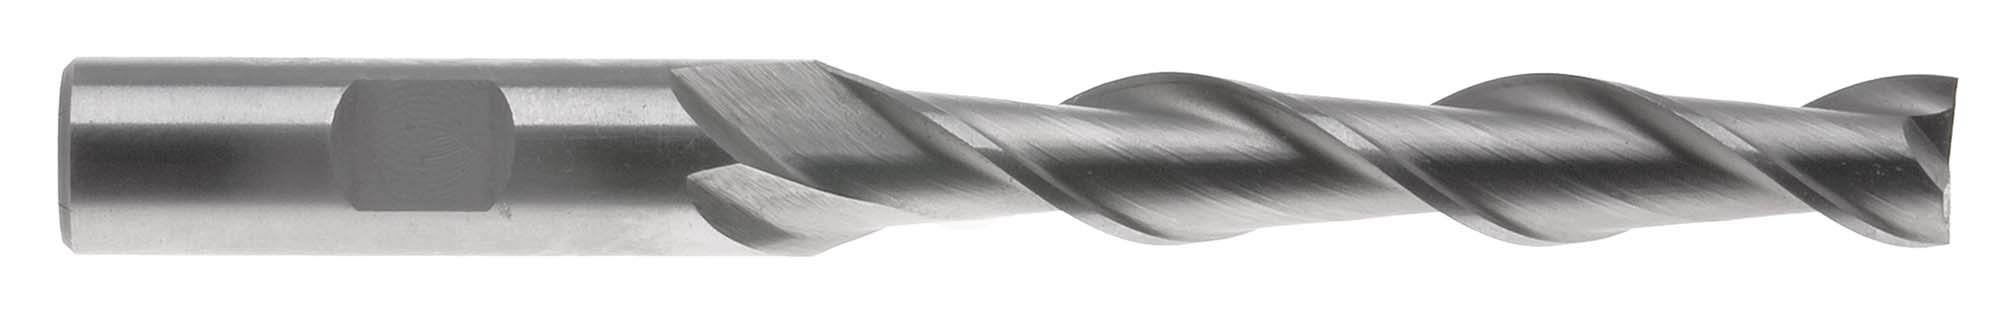 EM-AL16B  1/2"  Extra Long Aluminum Cutting 2 Flute End Mill with High Helix Flutes, 1/2" shank, High Speed Steel